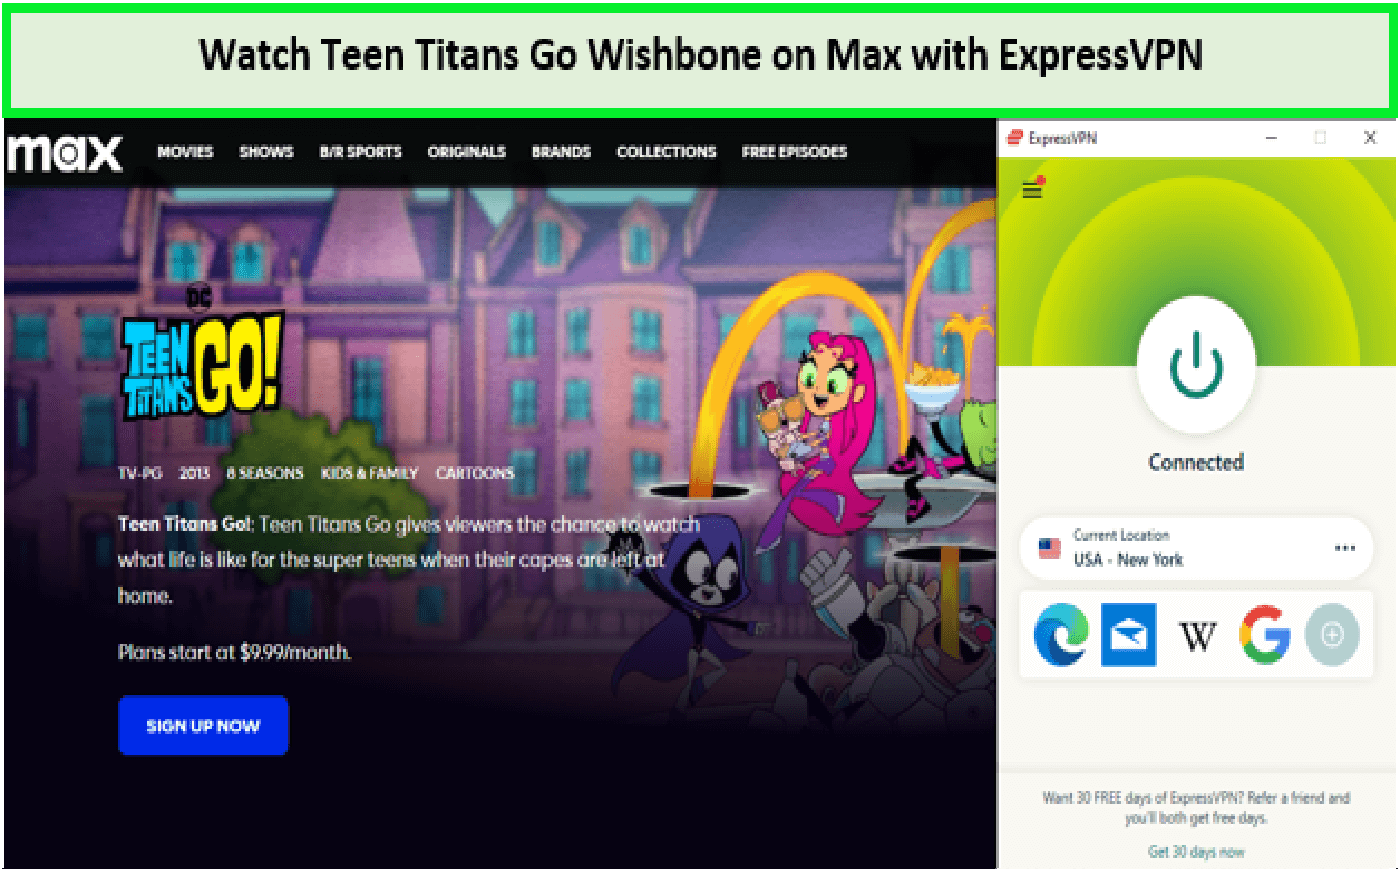 Watch-Teen-Titans-Go-Wishbone-in-France-on-Max-with-ExpressVPN